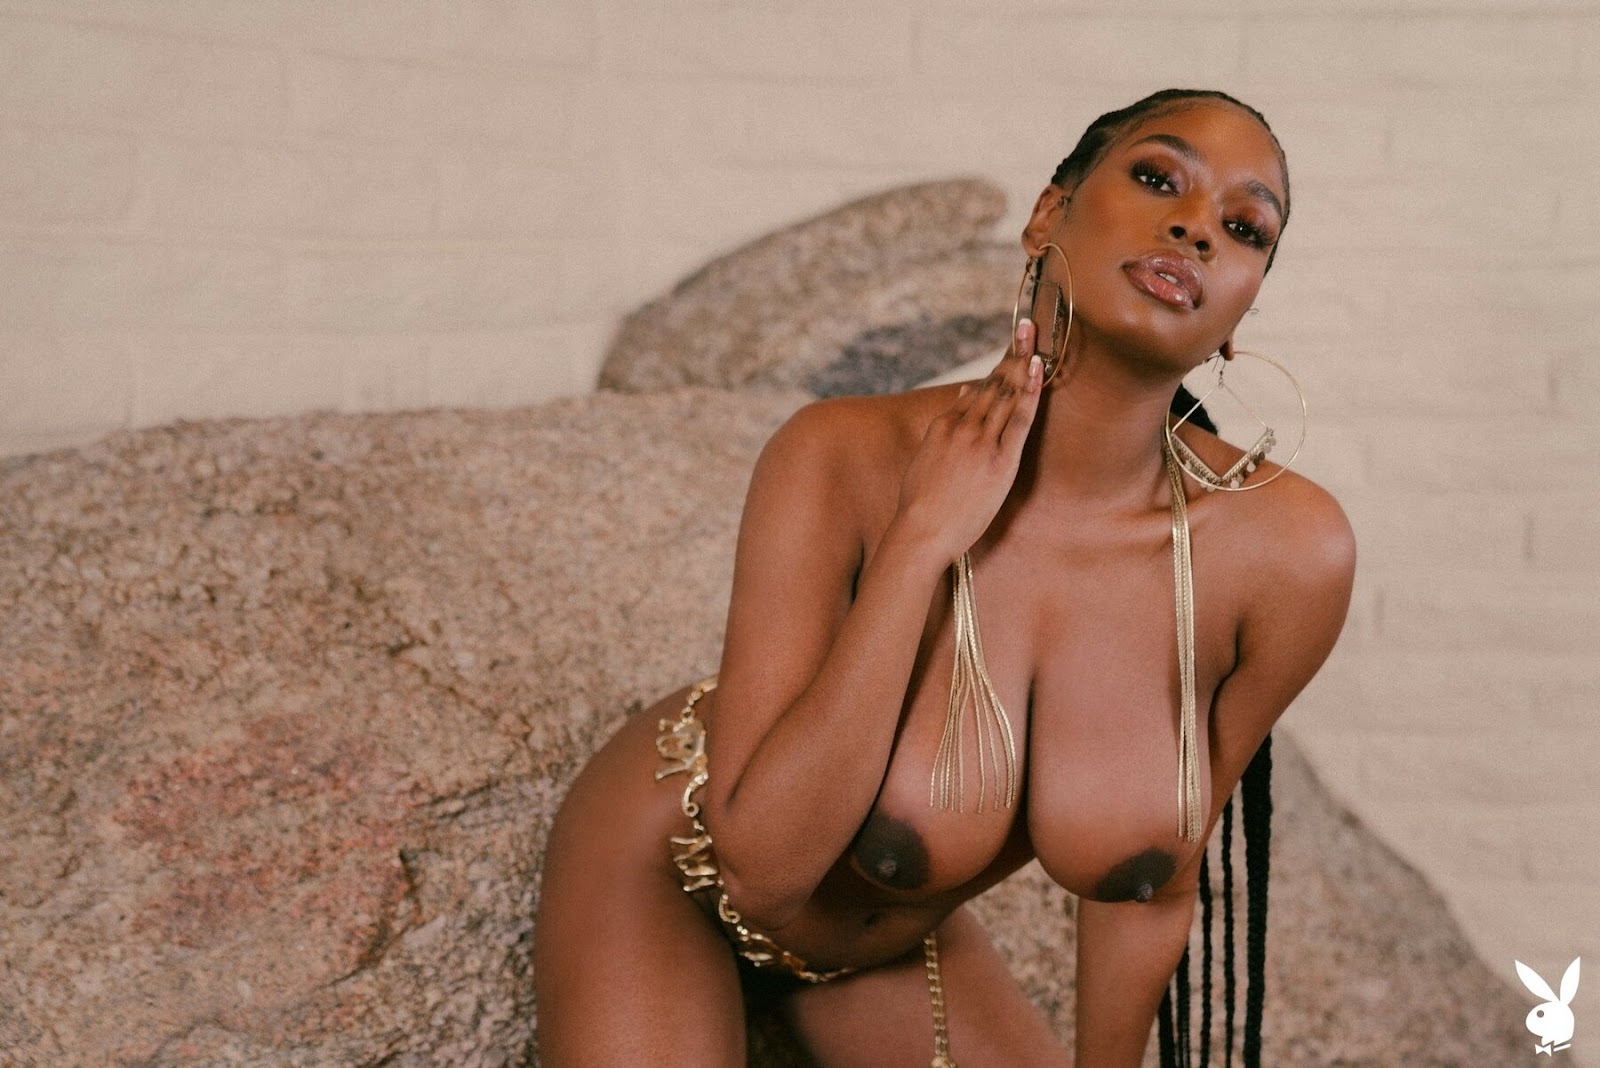 Nyla in Playboy’s Women's Intuition